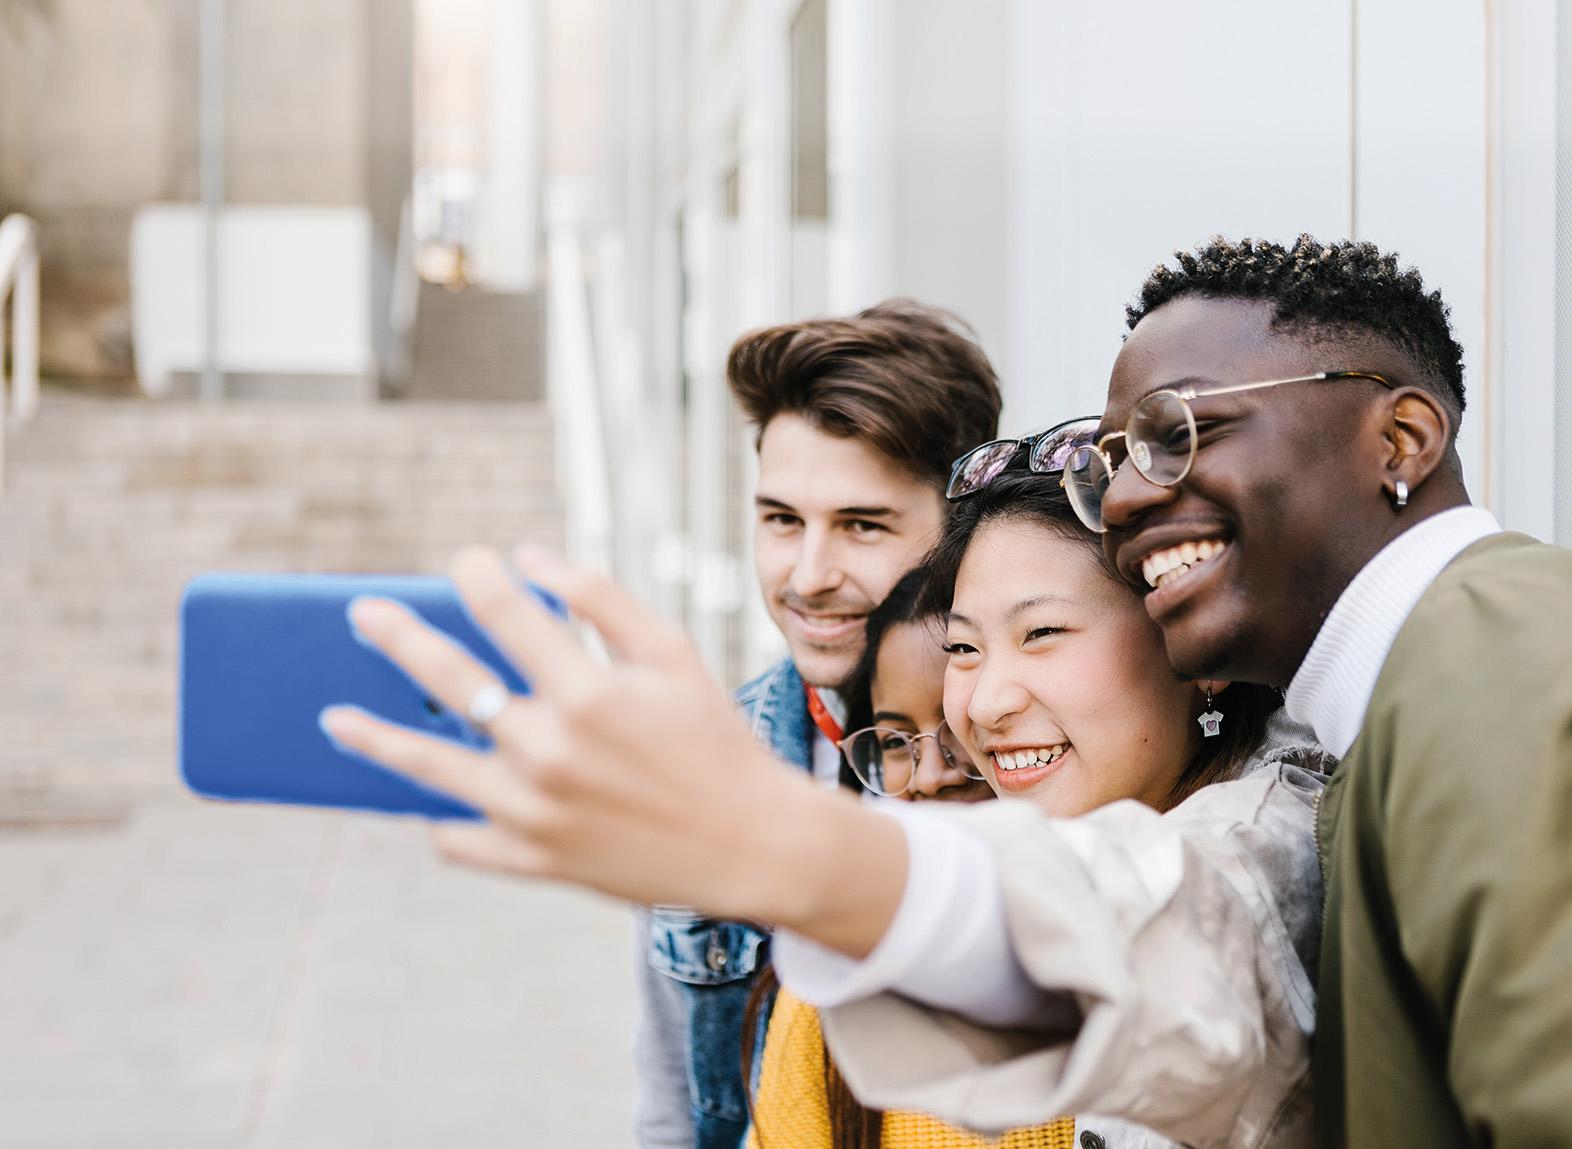 Young adult woman taking selfie portrait with group of friends outdoors at school